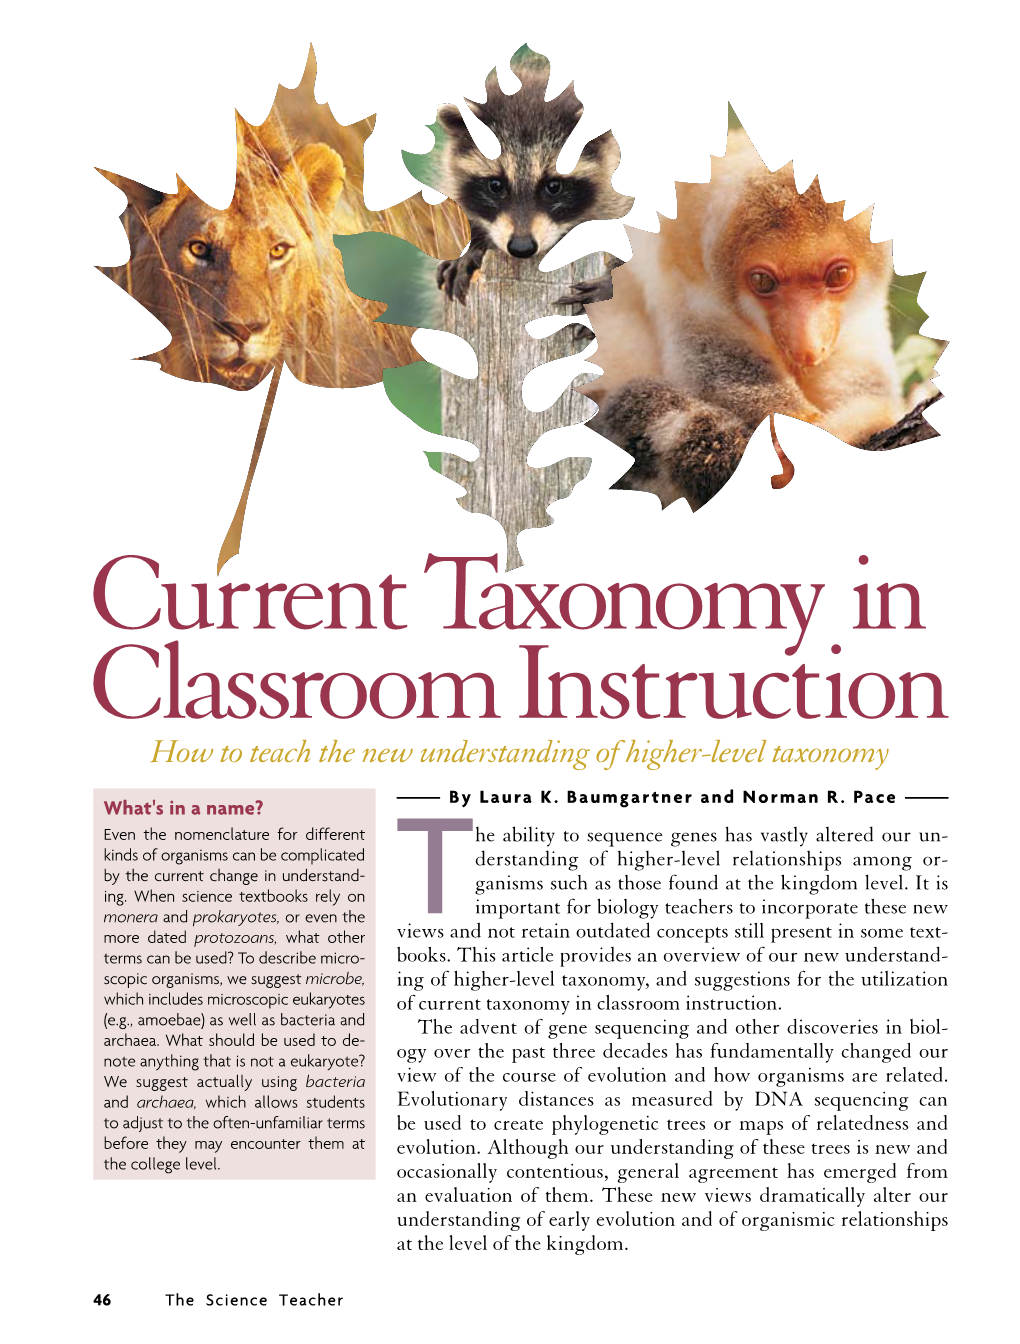 How to Teach the New Understanding of Higher-Level Taxonomy by Laura K